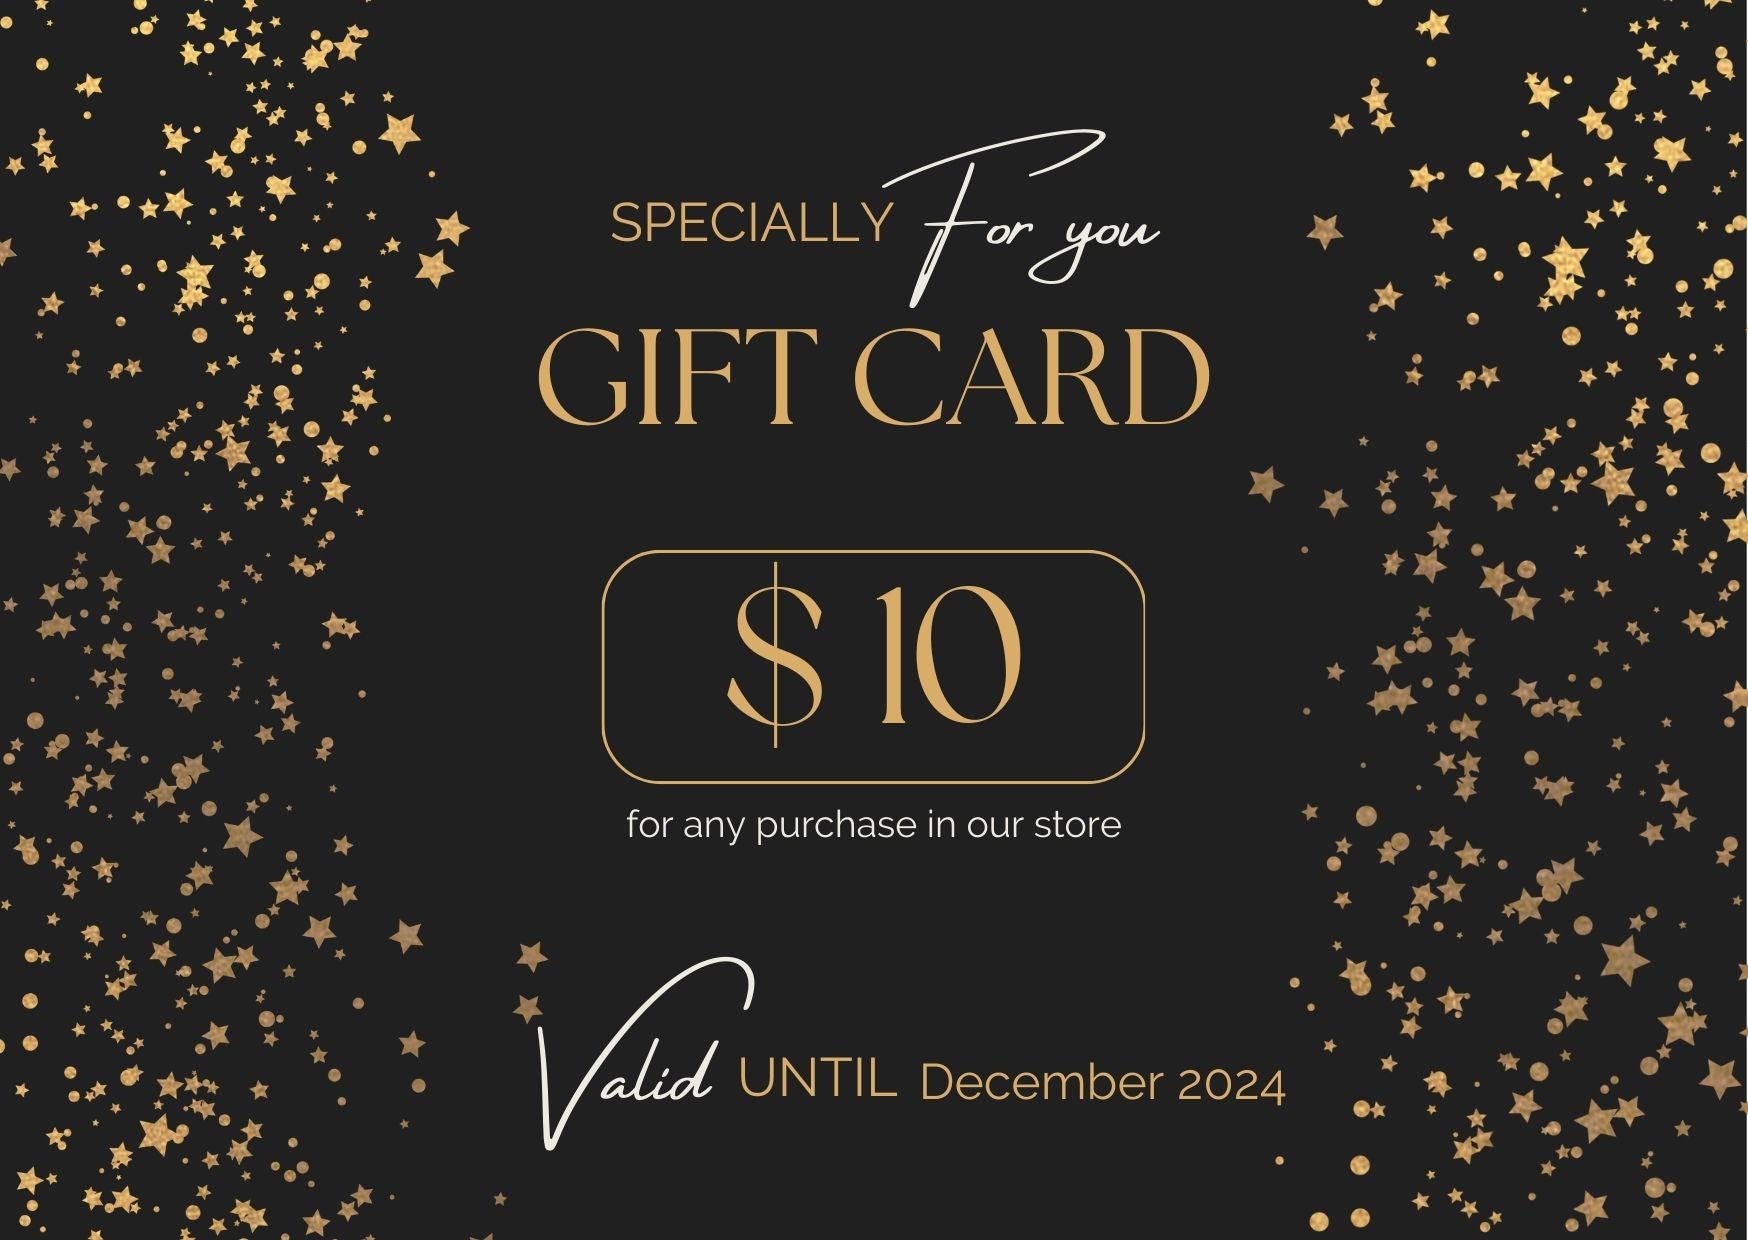 erotic stories gift card